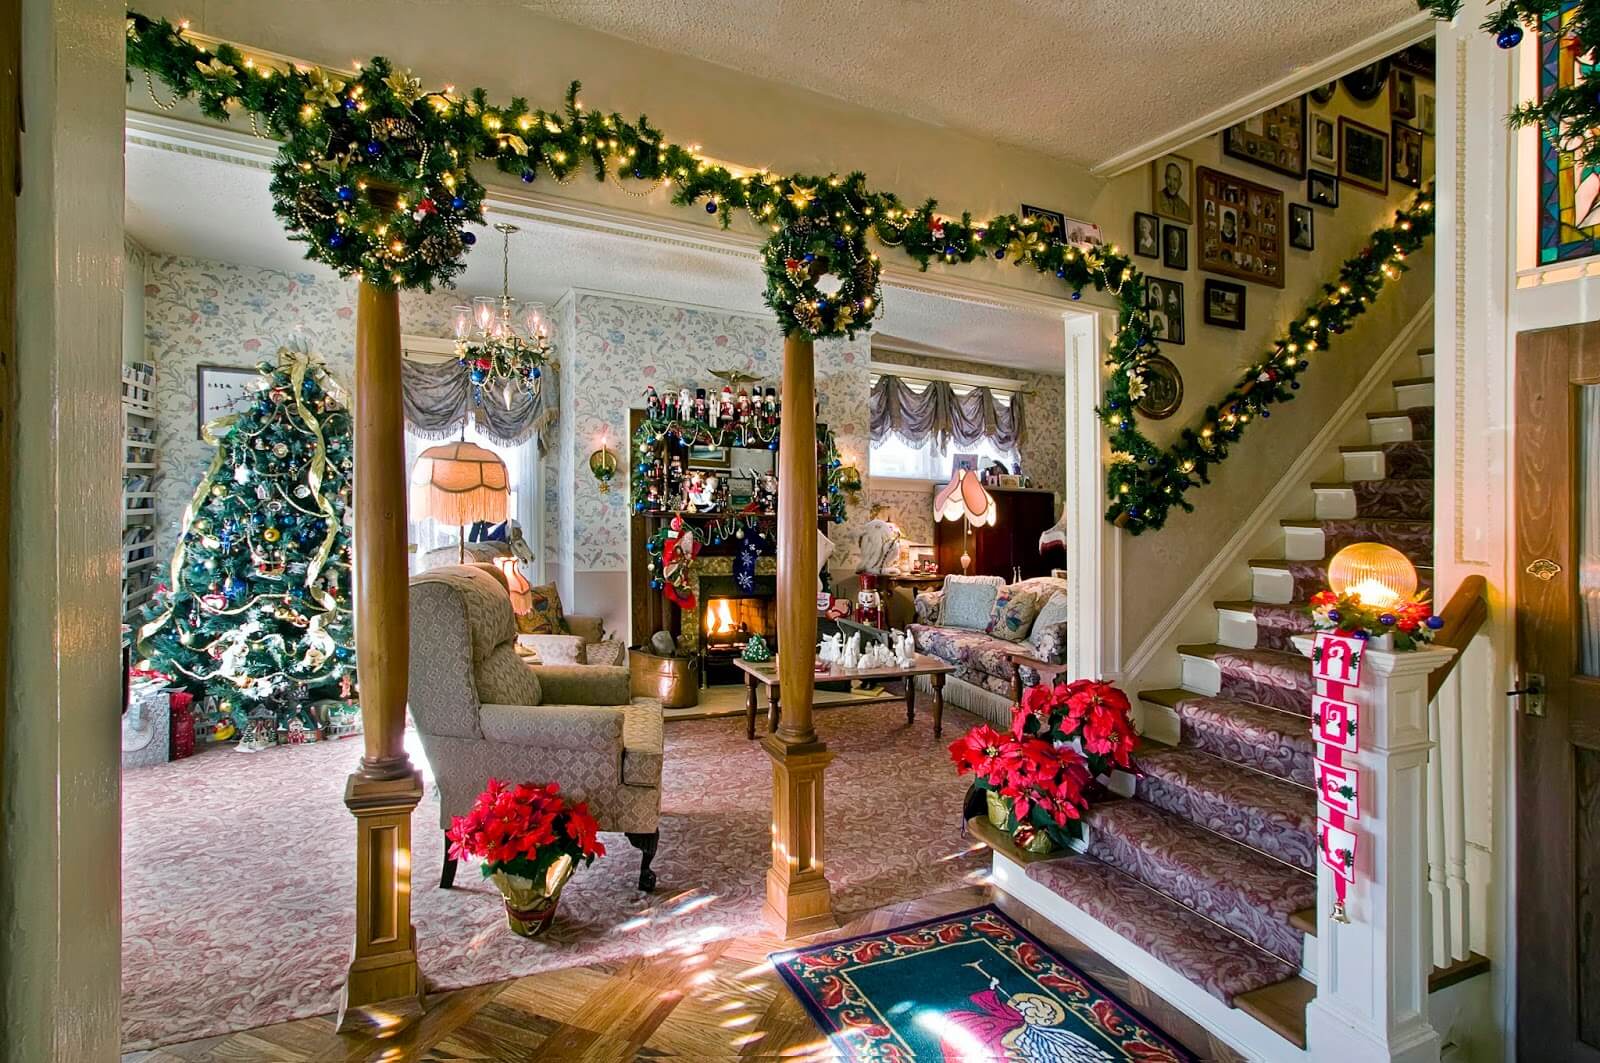 50 Best Indoor Decoration Ideas For Christmas In 2021